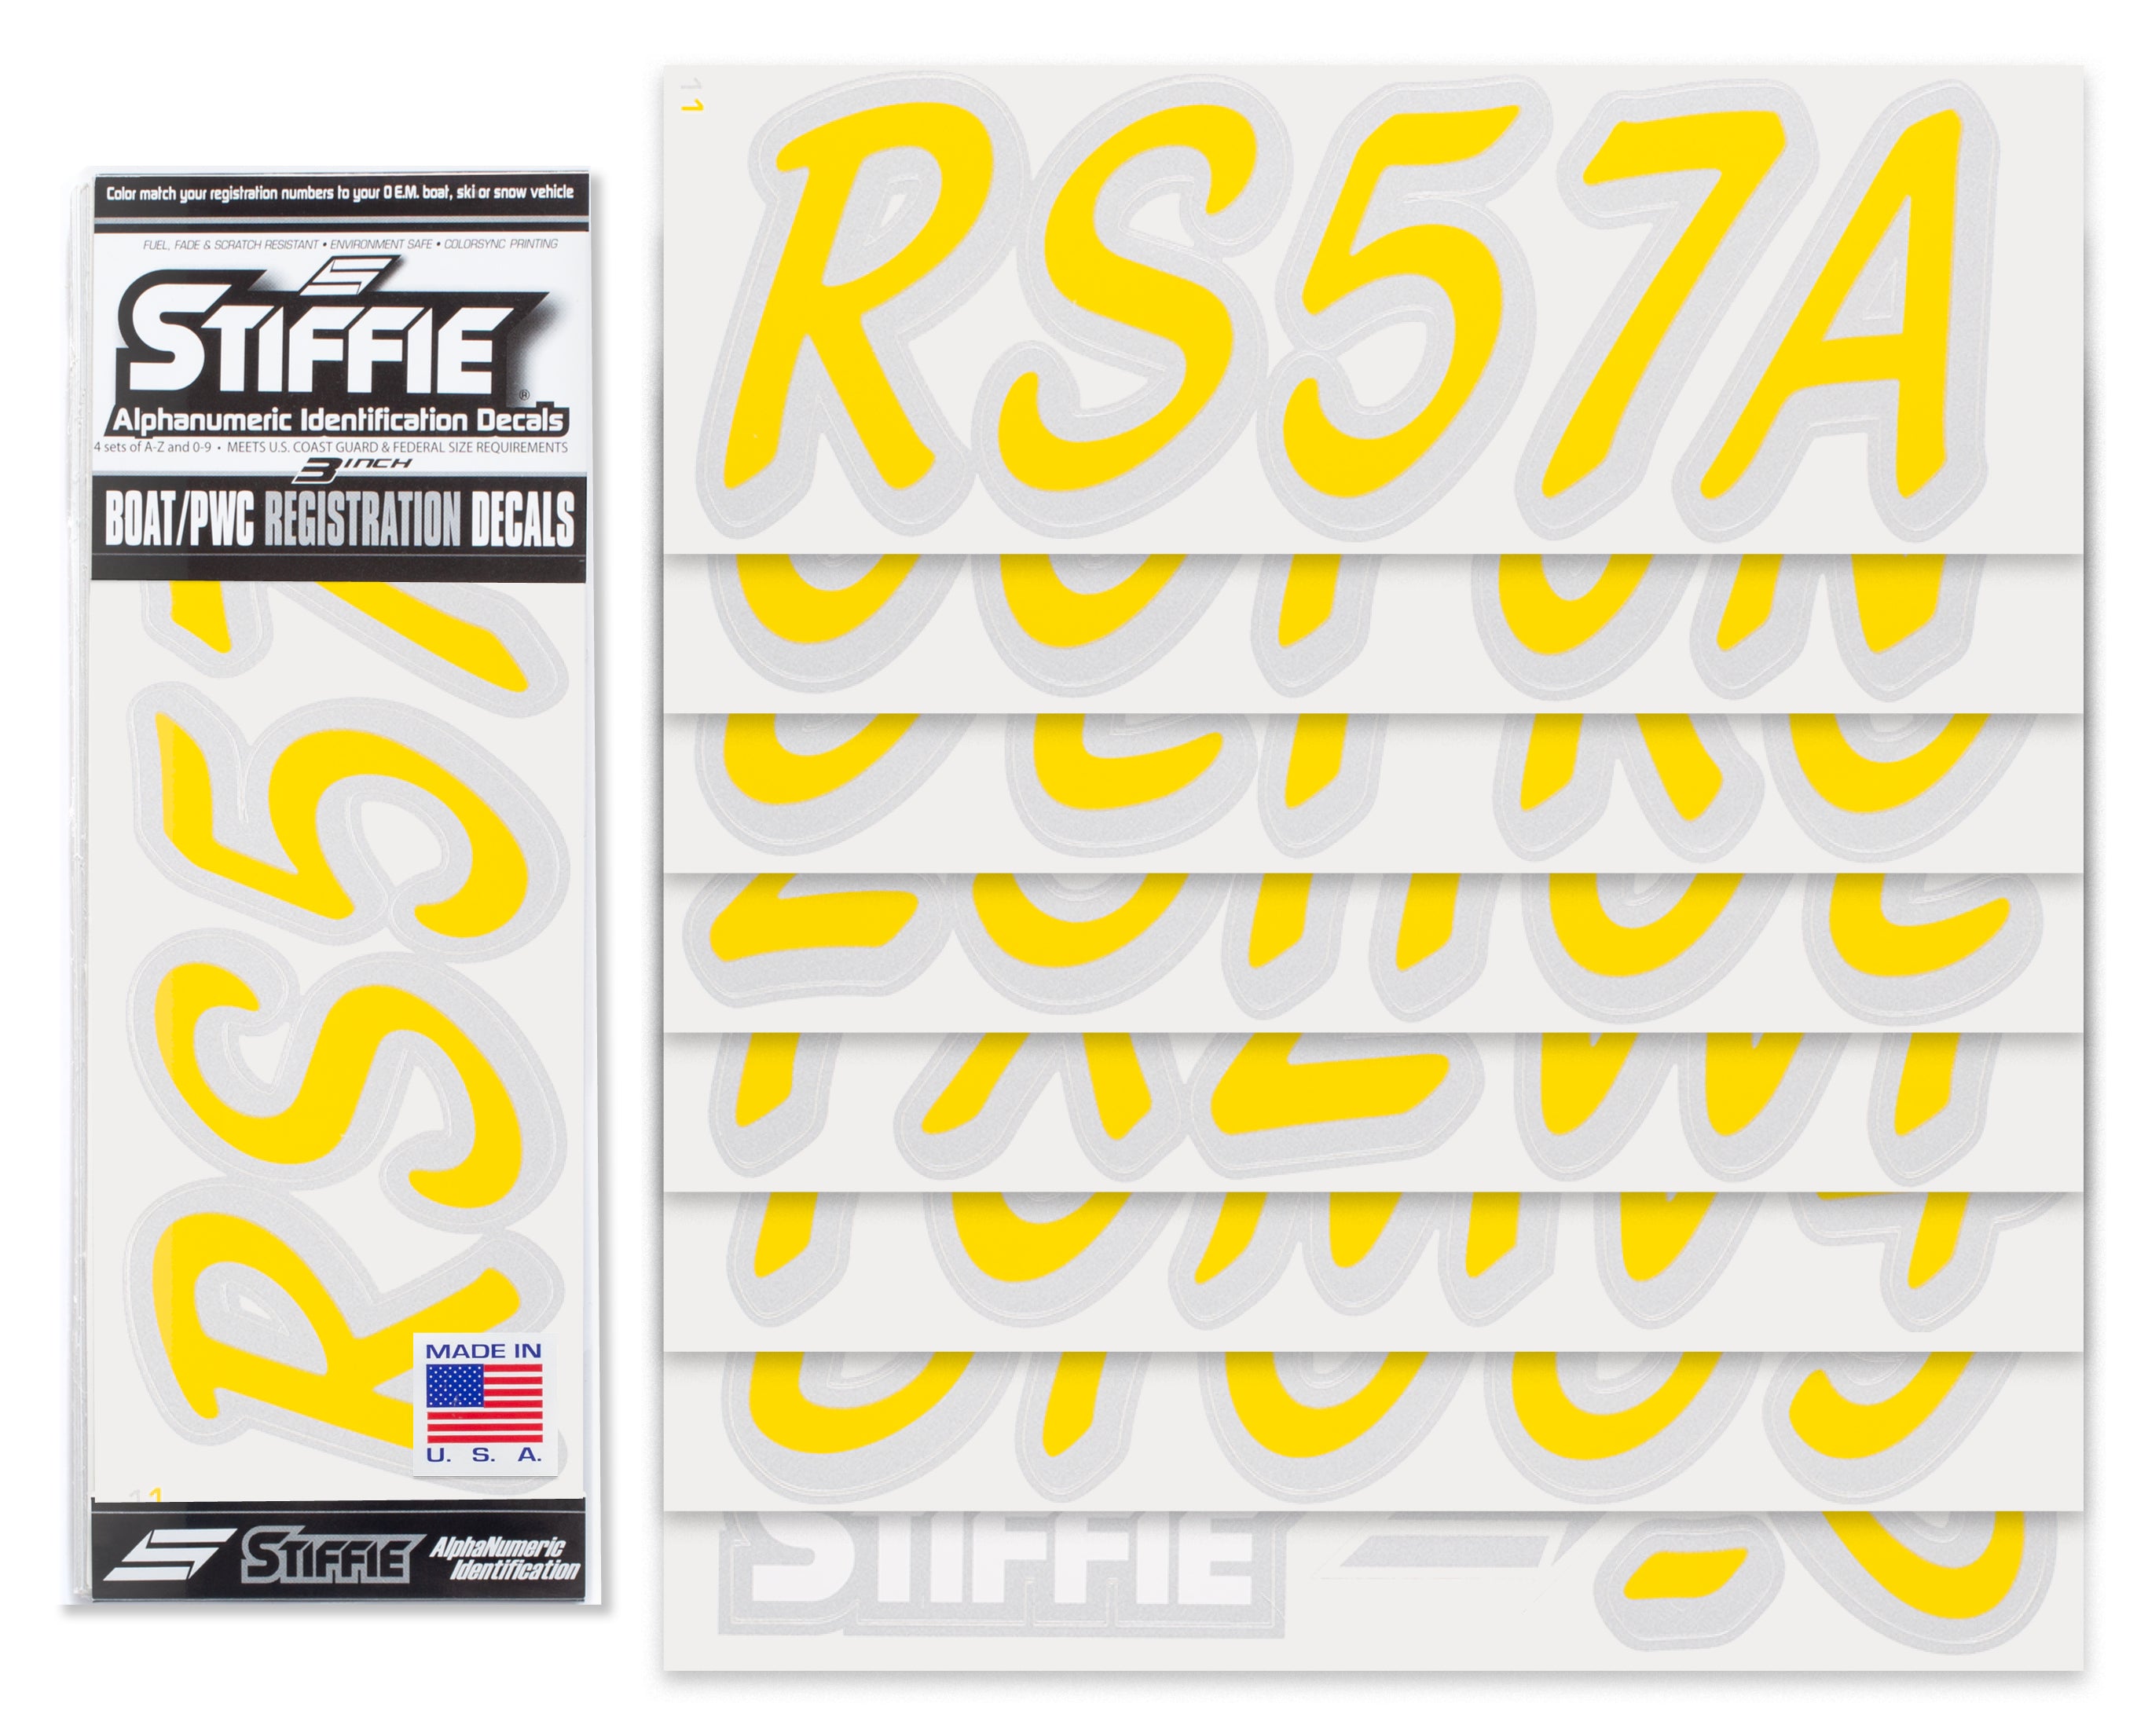 STIFFIE Whipline Solid Yellow/Metallic Silver 3" Alpha-Numeric Registration Identification Numbers Stickers Decals for Boats & Personal Watercraft